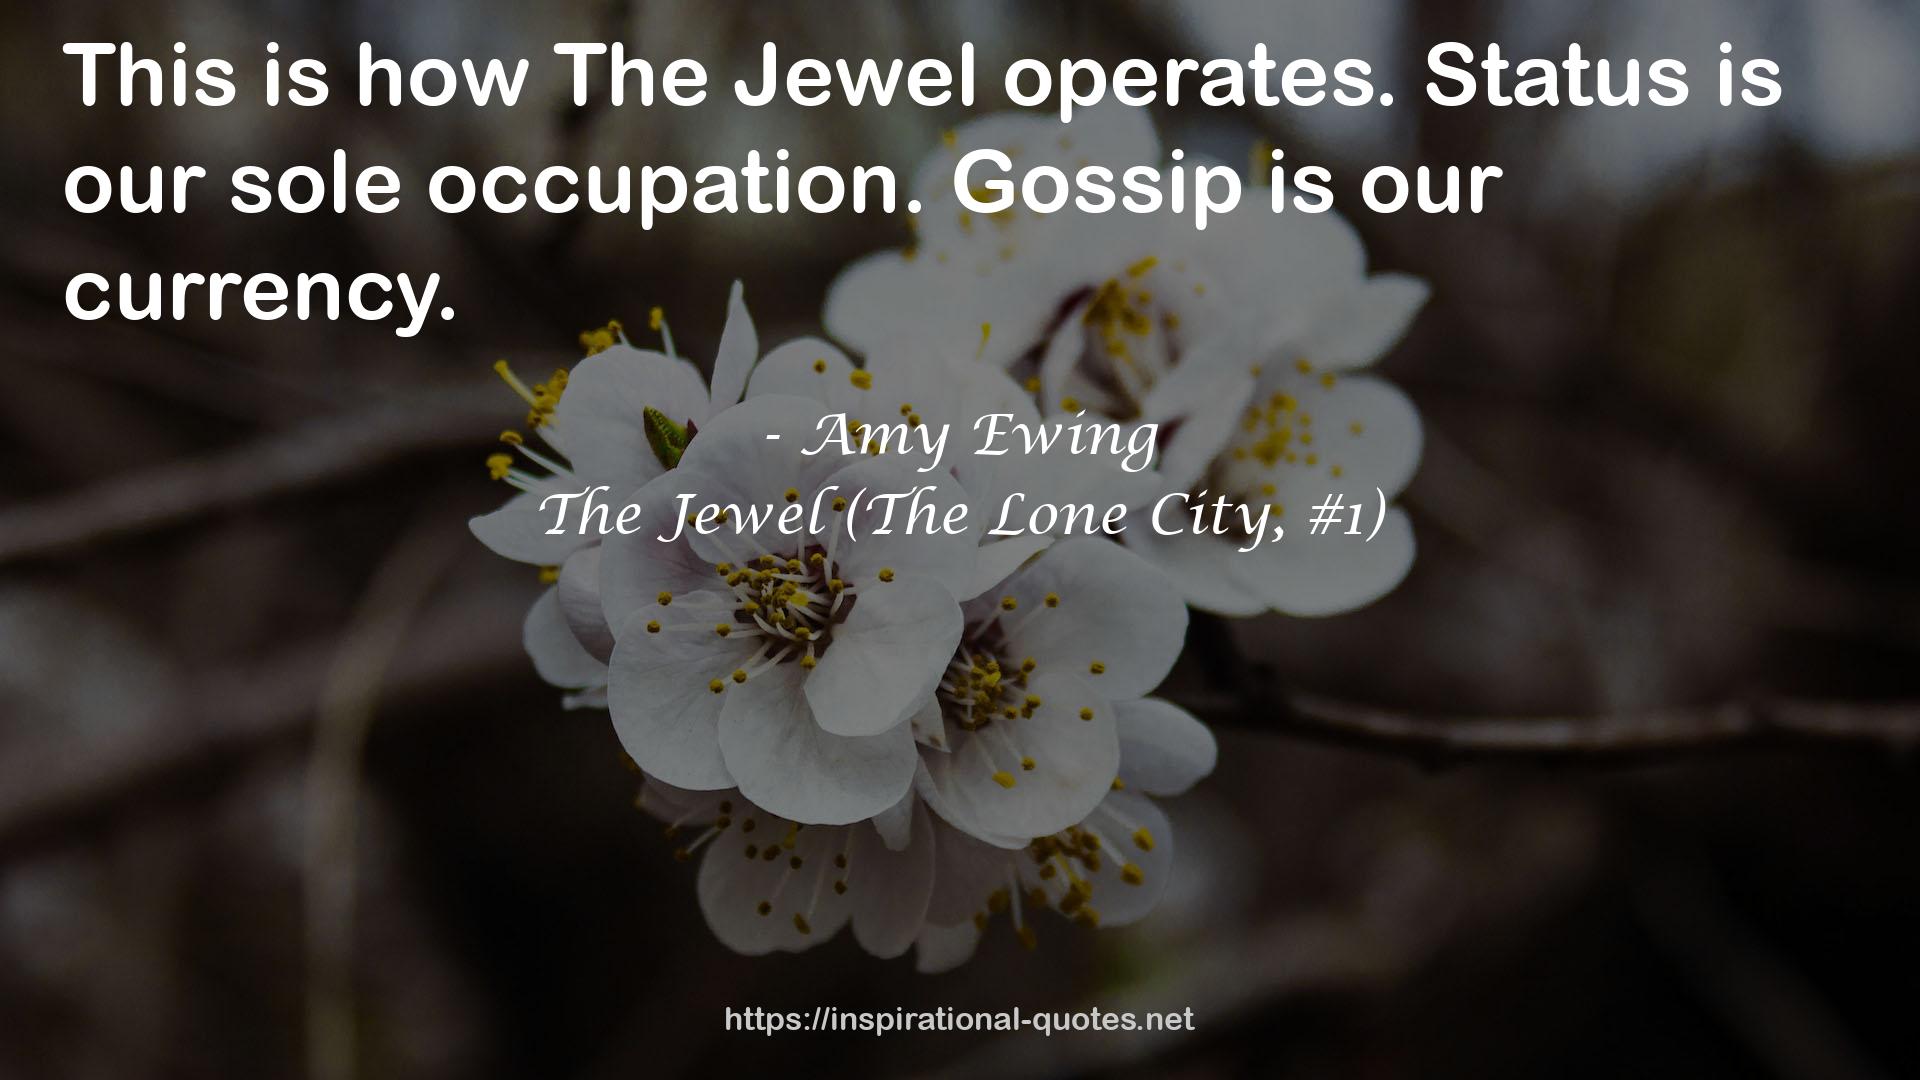 The Jewel (The Lone City, #1) QUOTES